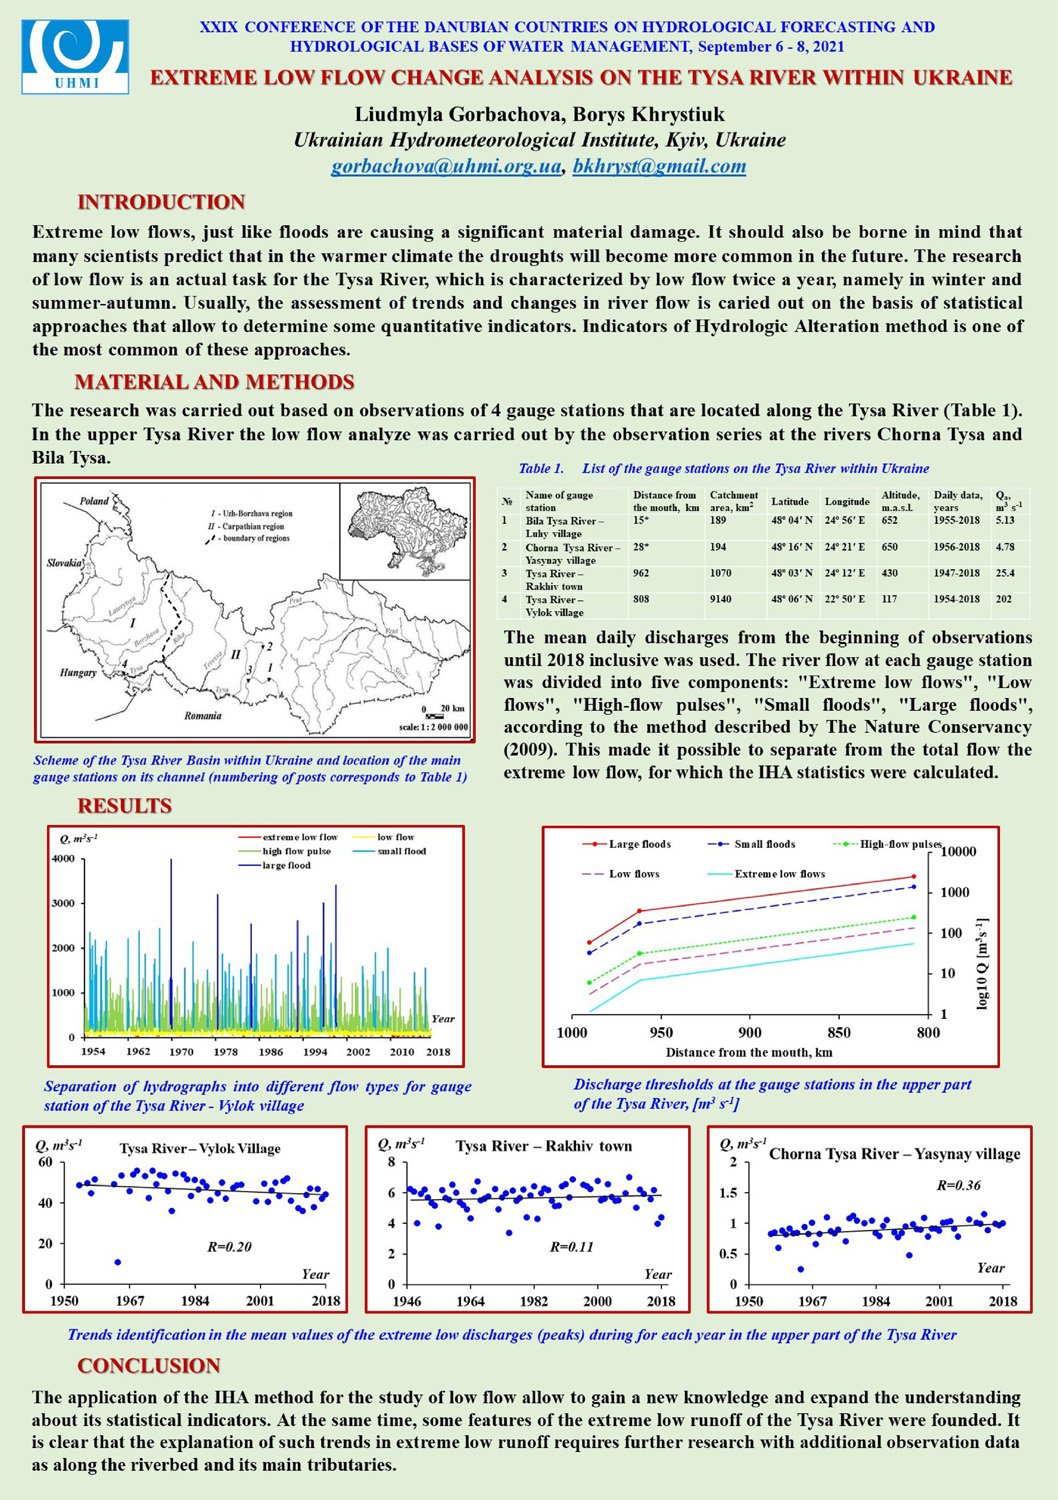 Danube Conference 2021 - Posters